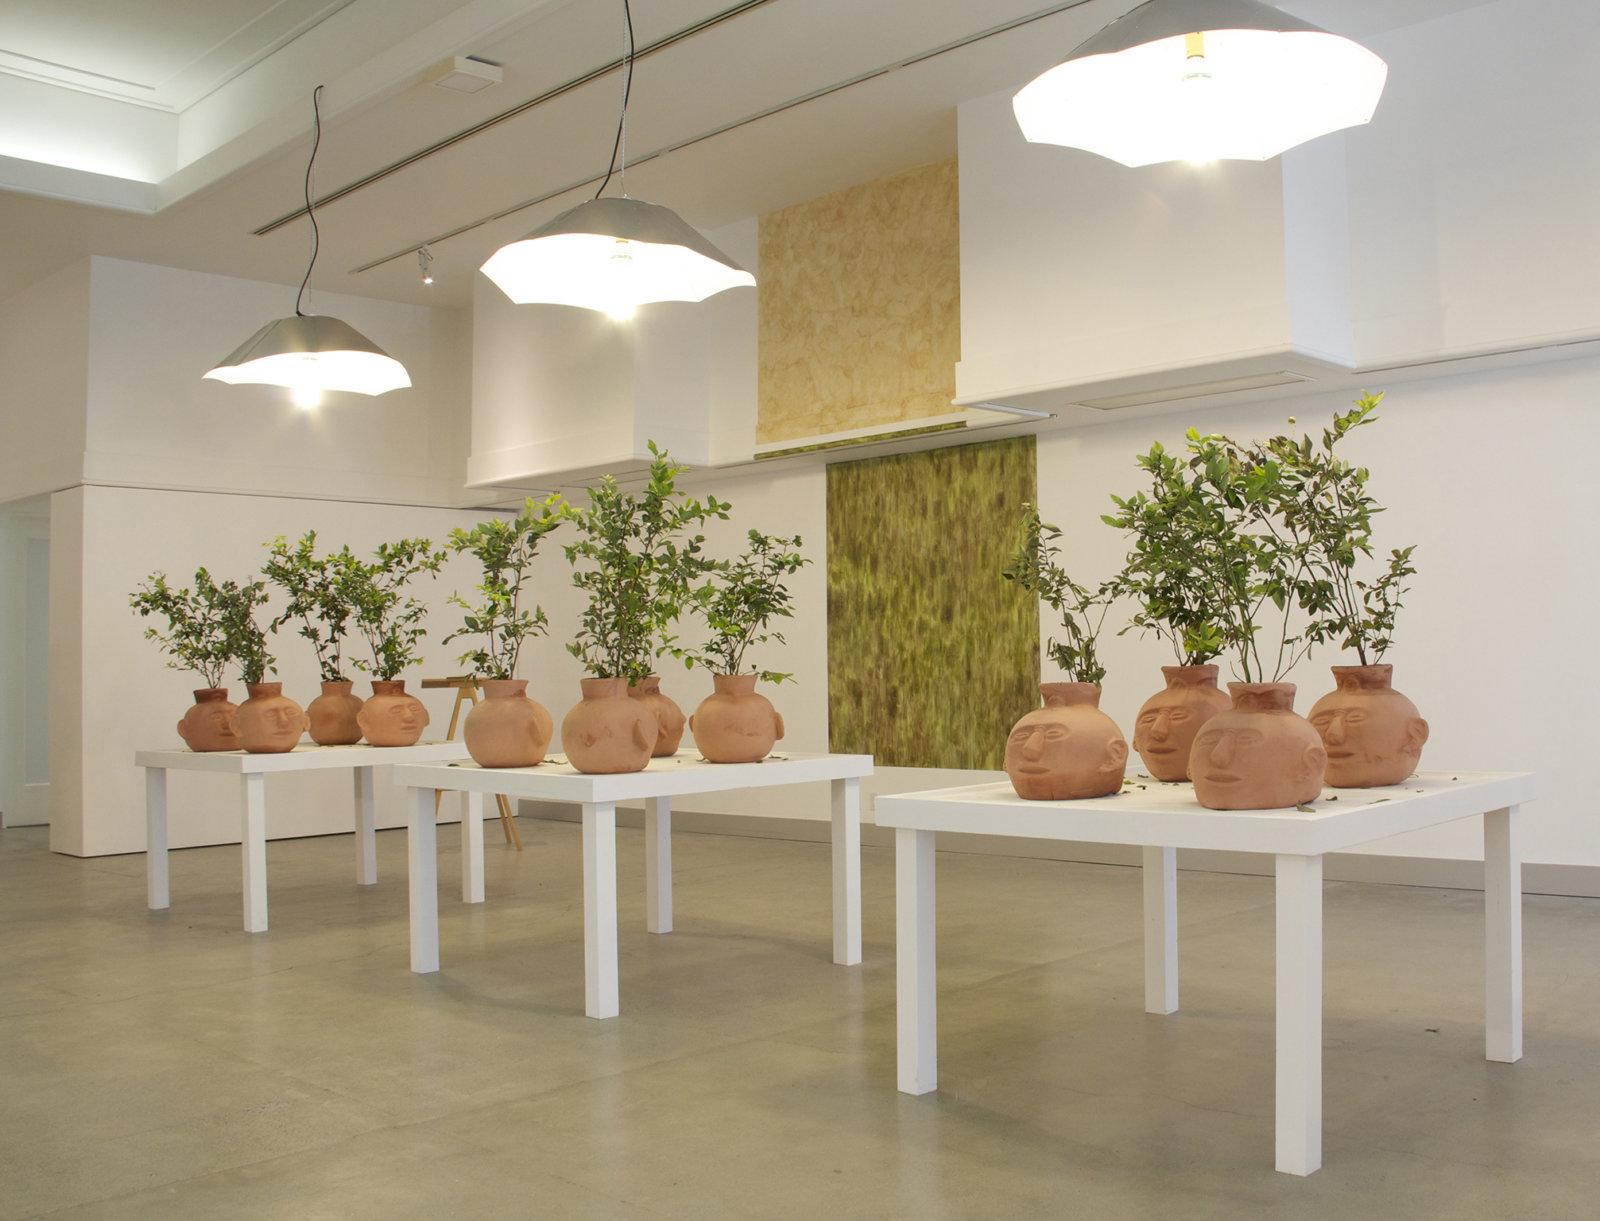 Duane Linklater, Blueberries for 12 Vessels, 2015, blueberry bushes, clay, earth, dimensions variable